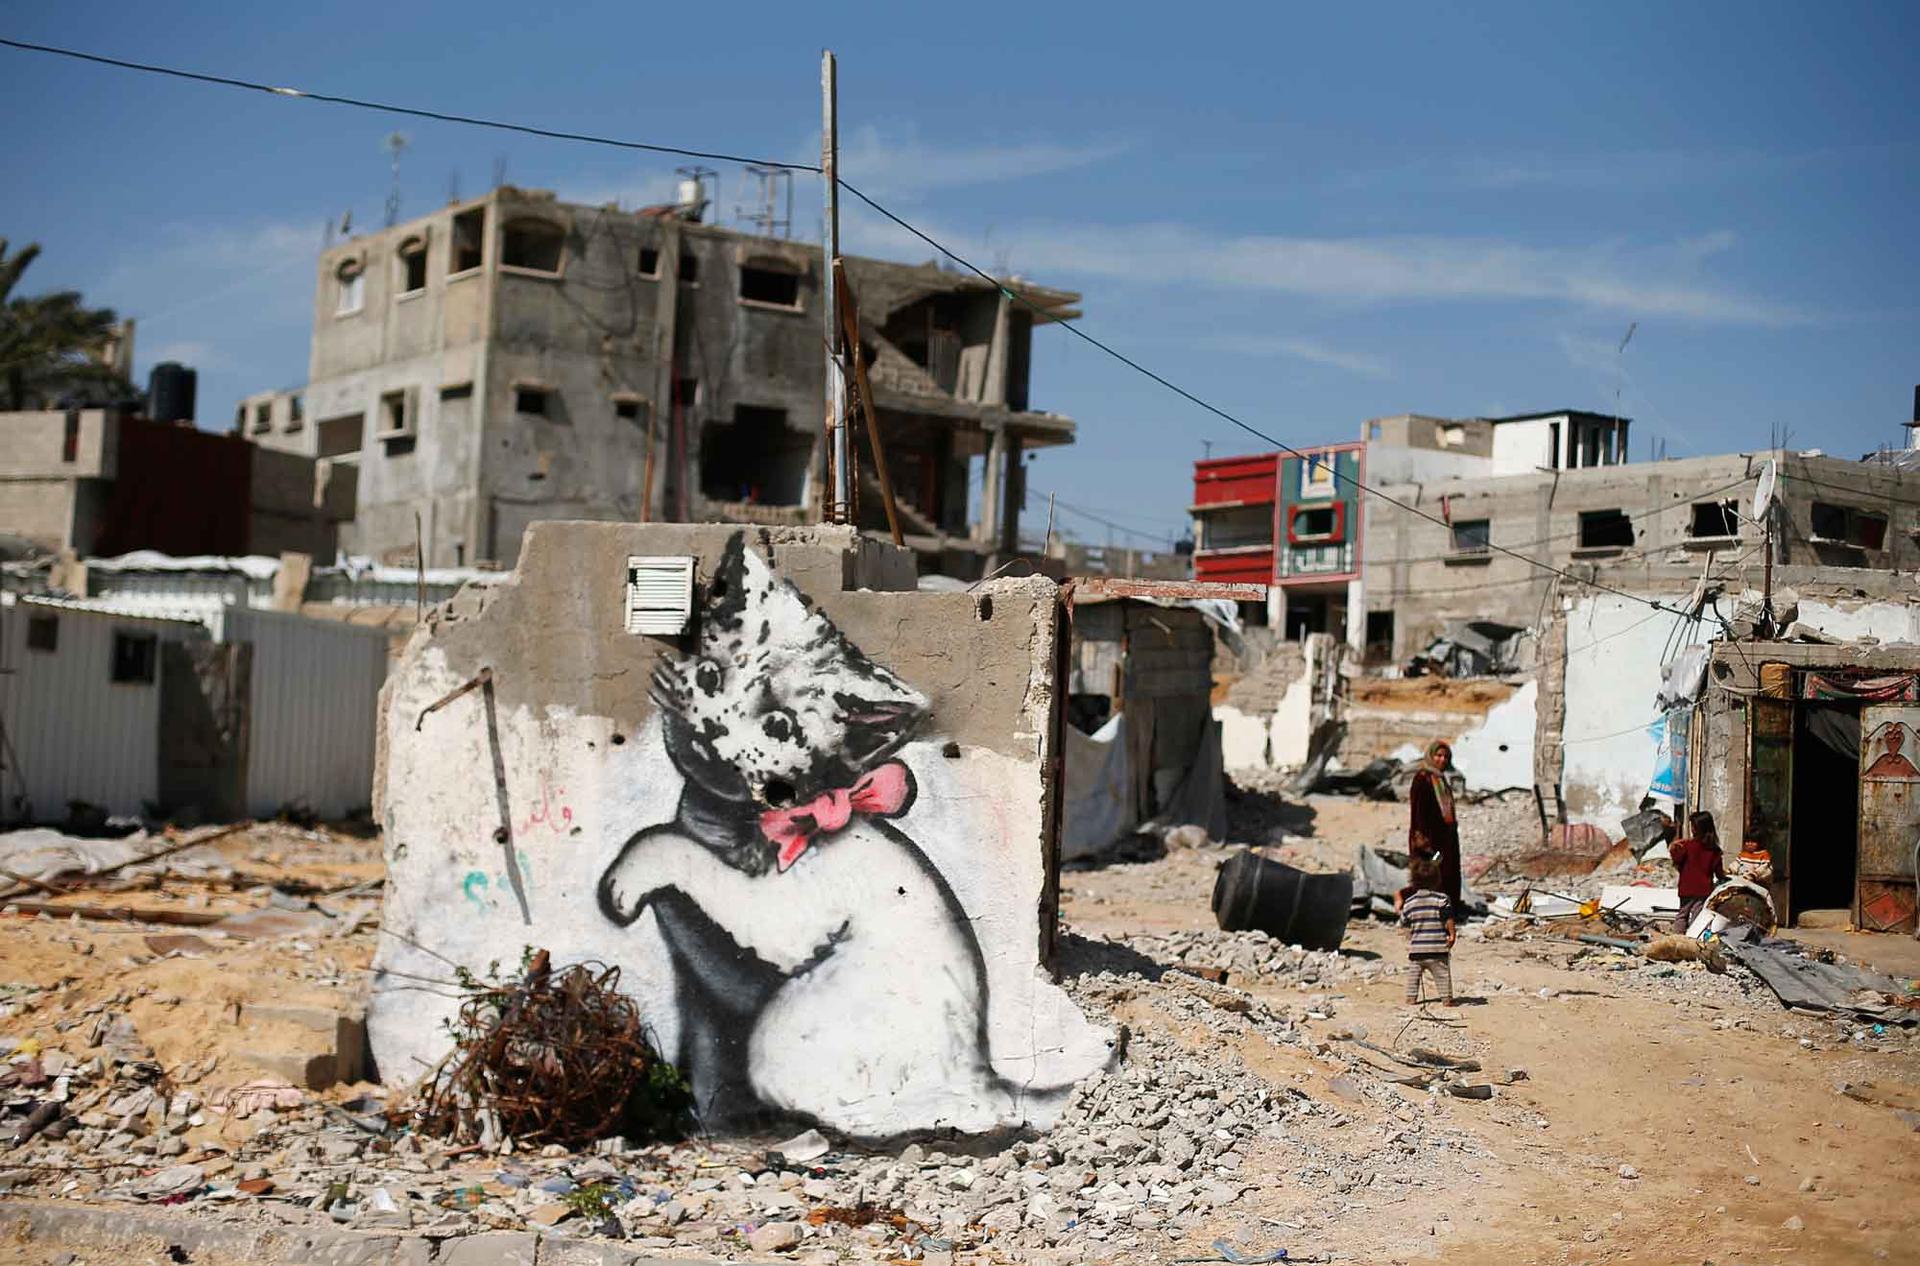 A mural of a playful-looking kitten, thought to be painted by British street artist Banksy, is seen on the remains of a house in Biet Hanoun. Banksy has posted a mini-documentary on his banksy.co.uk site showing squalid conditions in Gaza six months after